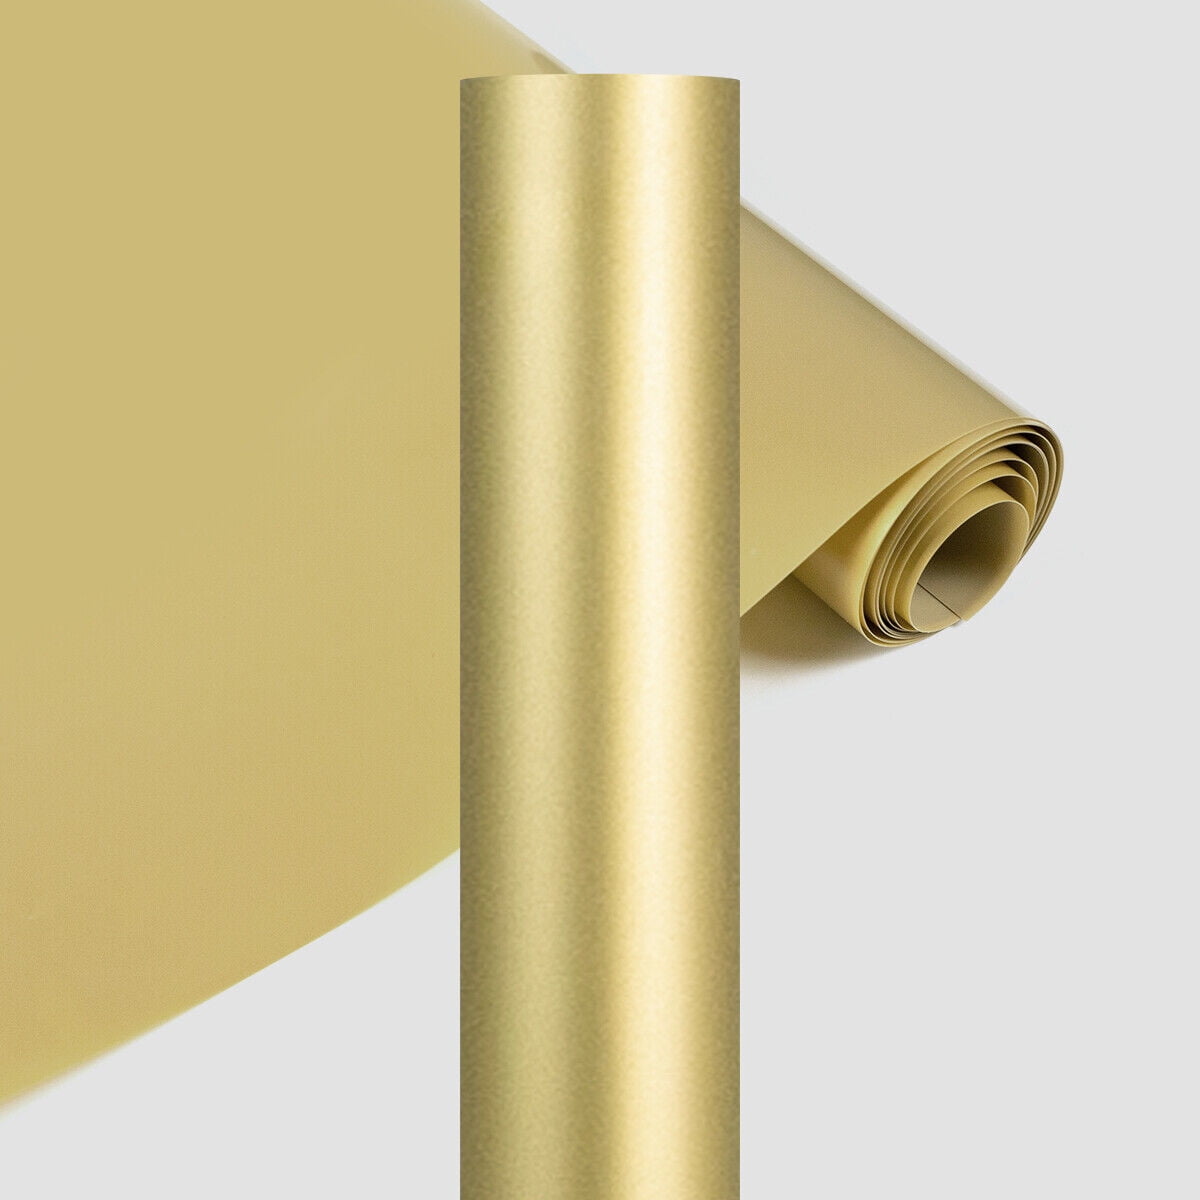 Gold Heat Transfer Vinyl Roll, 12 inch x 8' HTV Vinyl, Glossy Adhesive Gold Iron on Vinyl - Easy to Weed & Cut Vinyl HTV for T-Shirt (Gold, 12 inch x